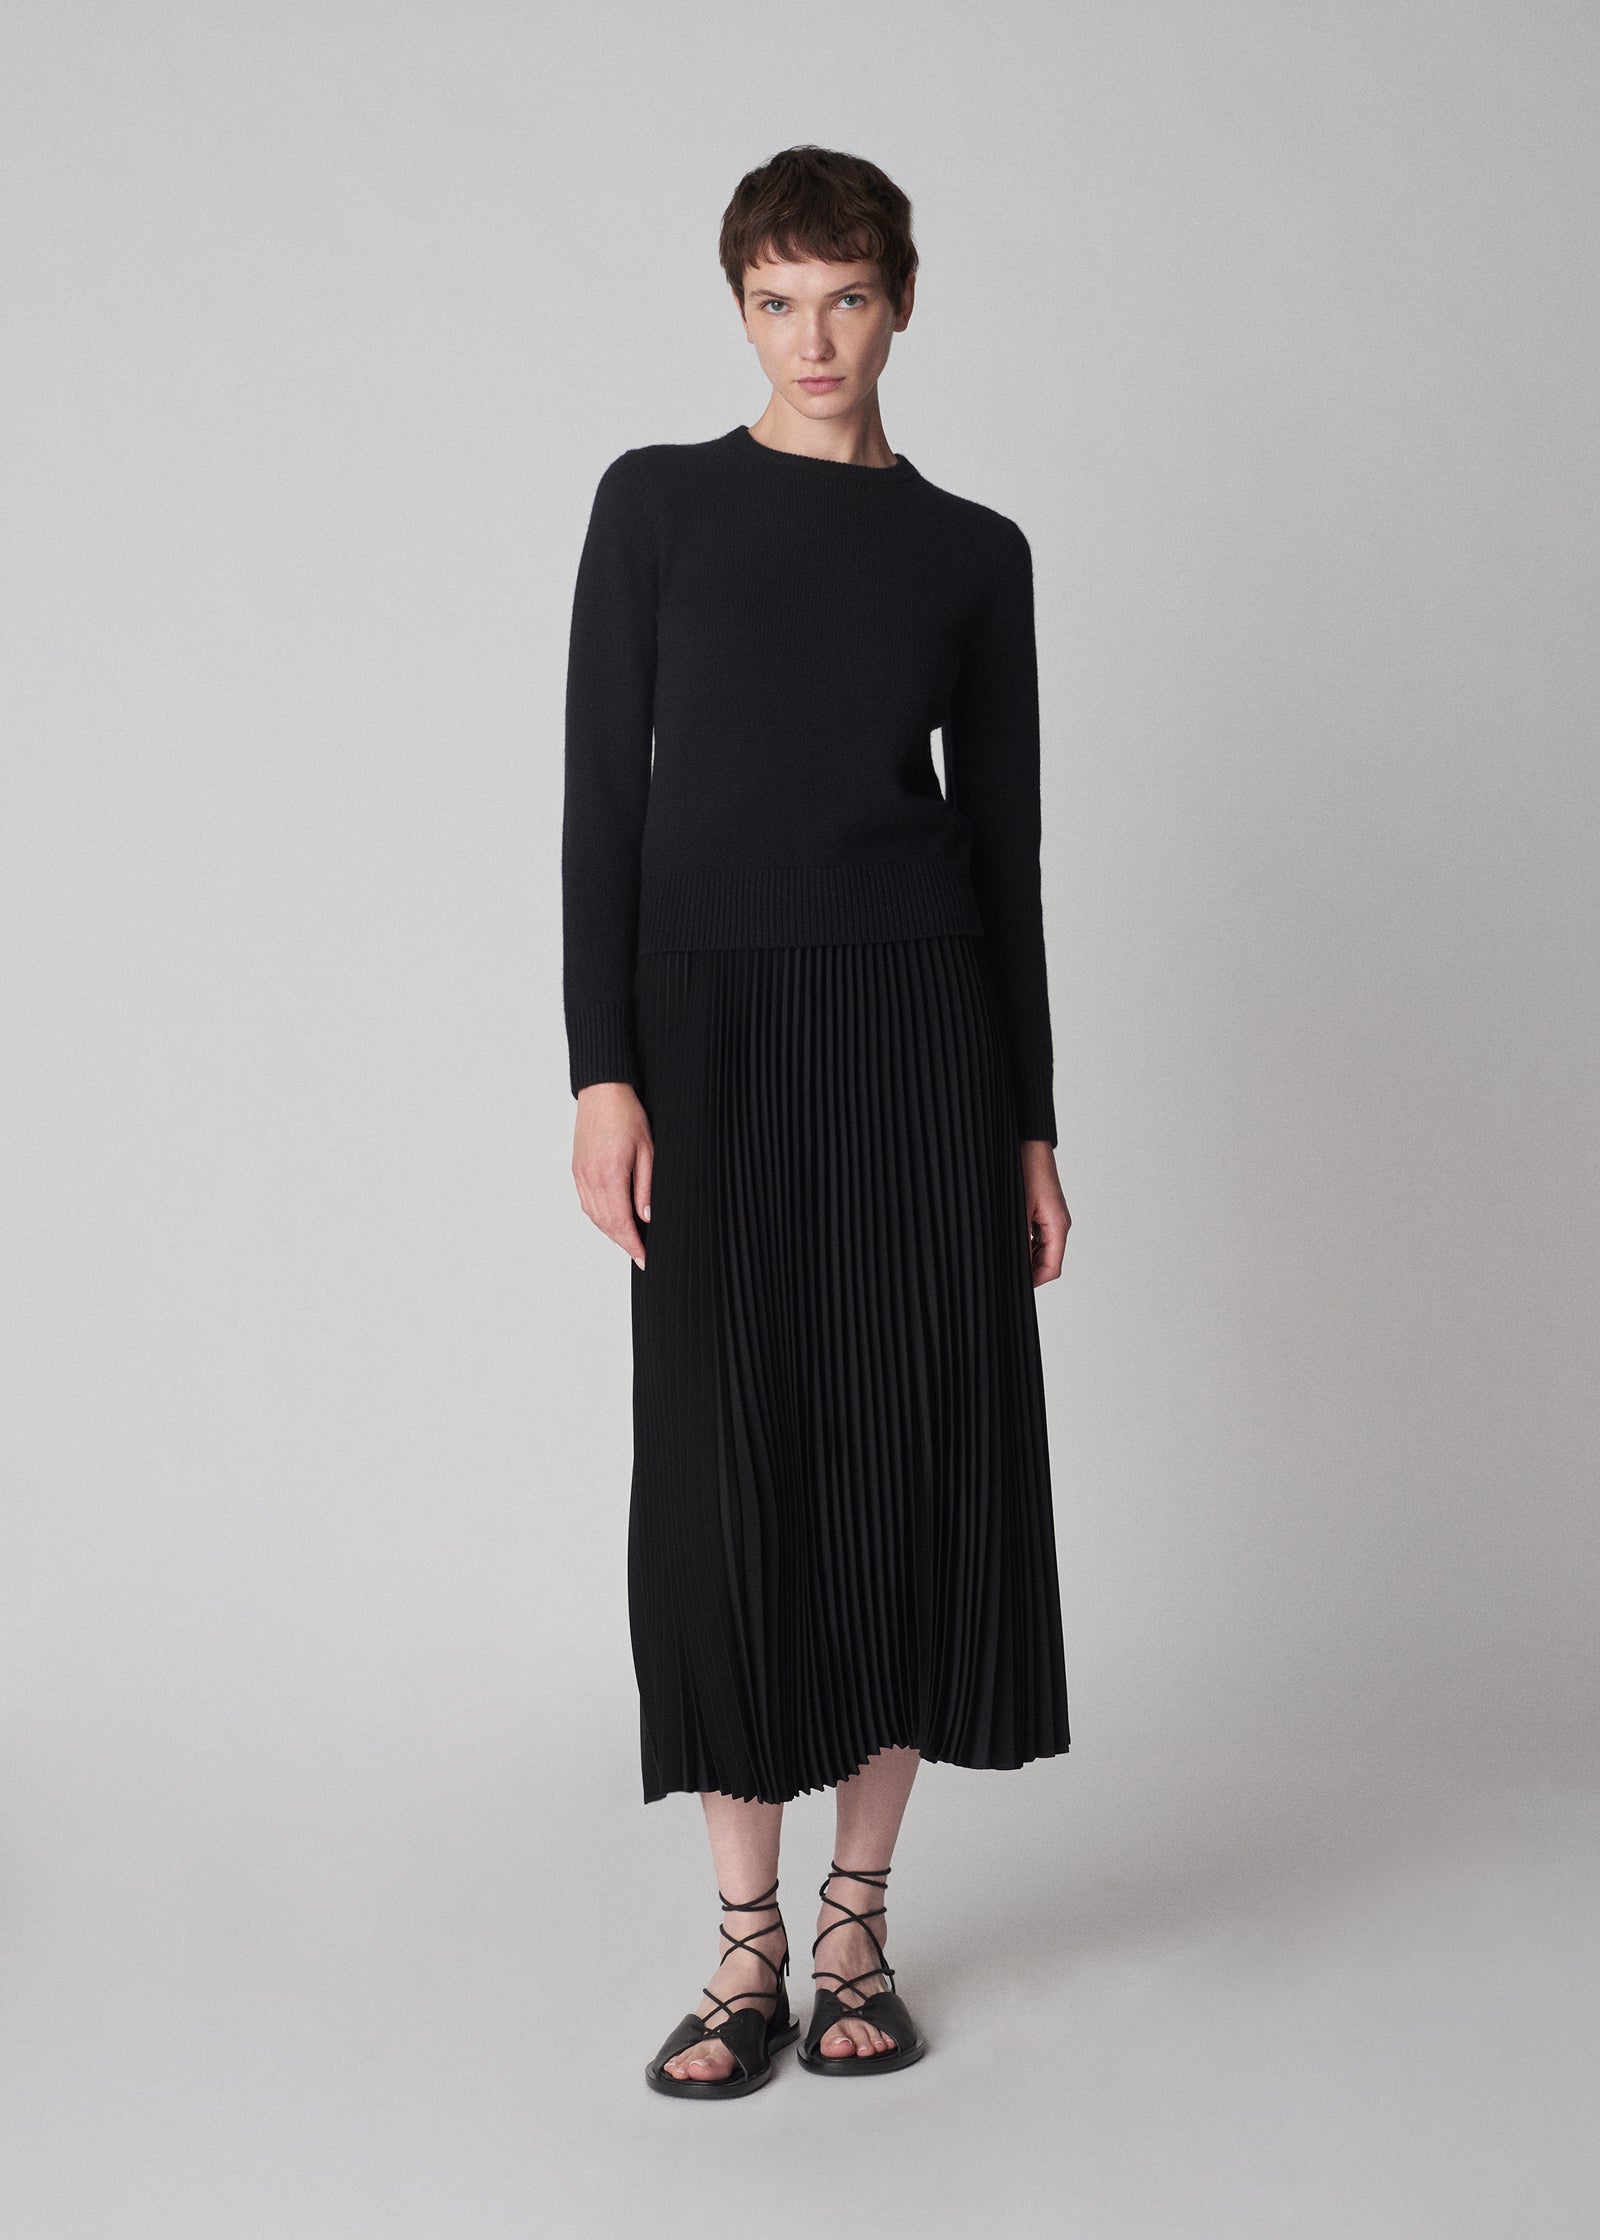 Pleated Elastic Waist Skirt in Stretch Crepe - Black - CO Collections